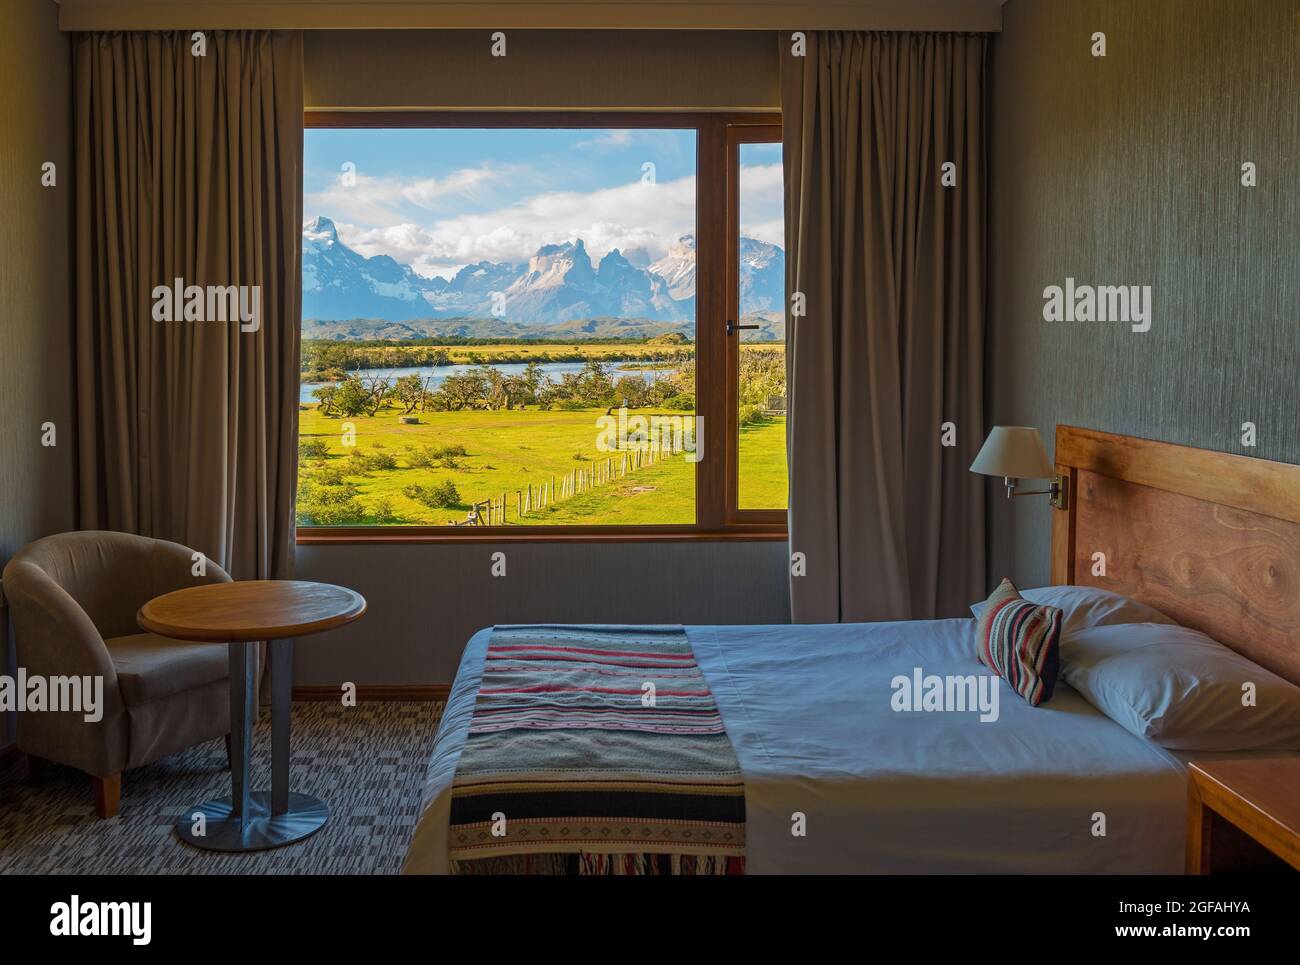 Hotel room with classic design and open curtains with view over the Cuernos del Paine, Torres del Paine national park, Patagonia, Chile. Stock Photo